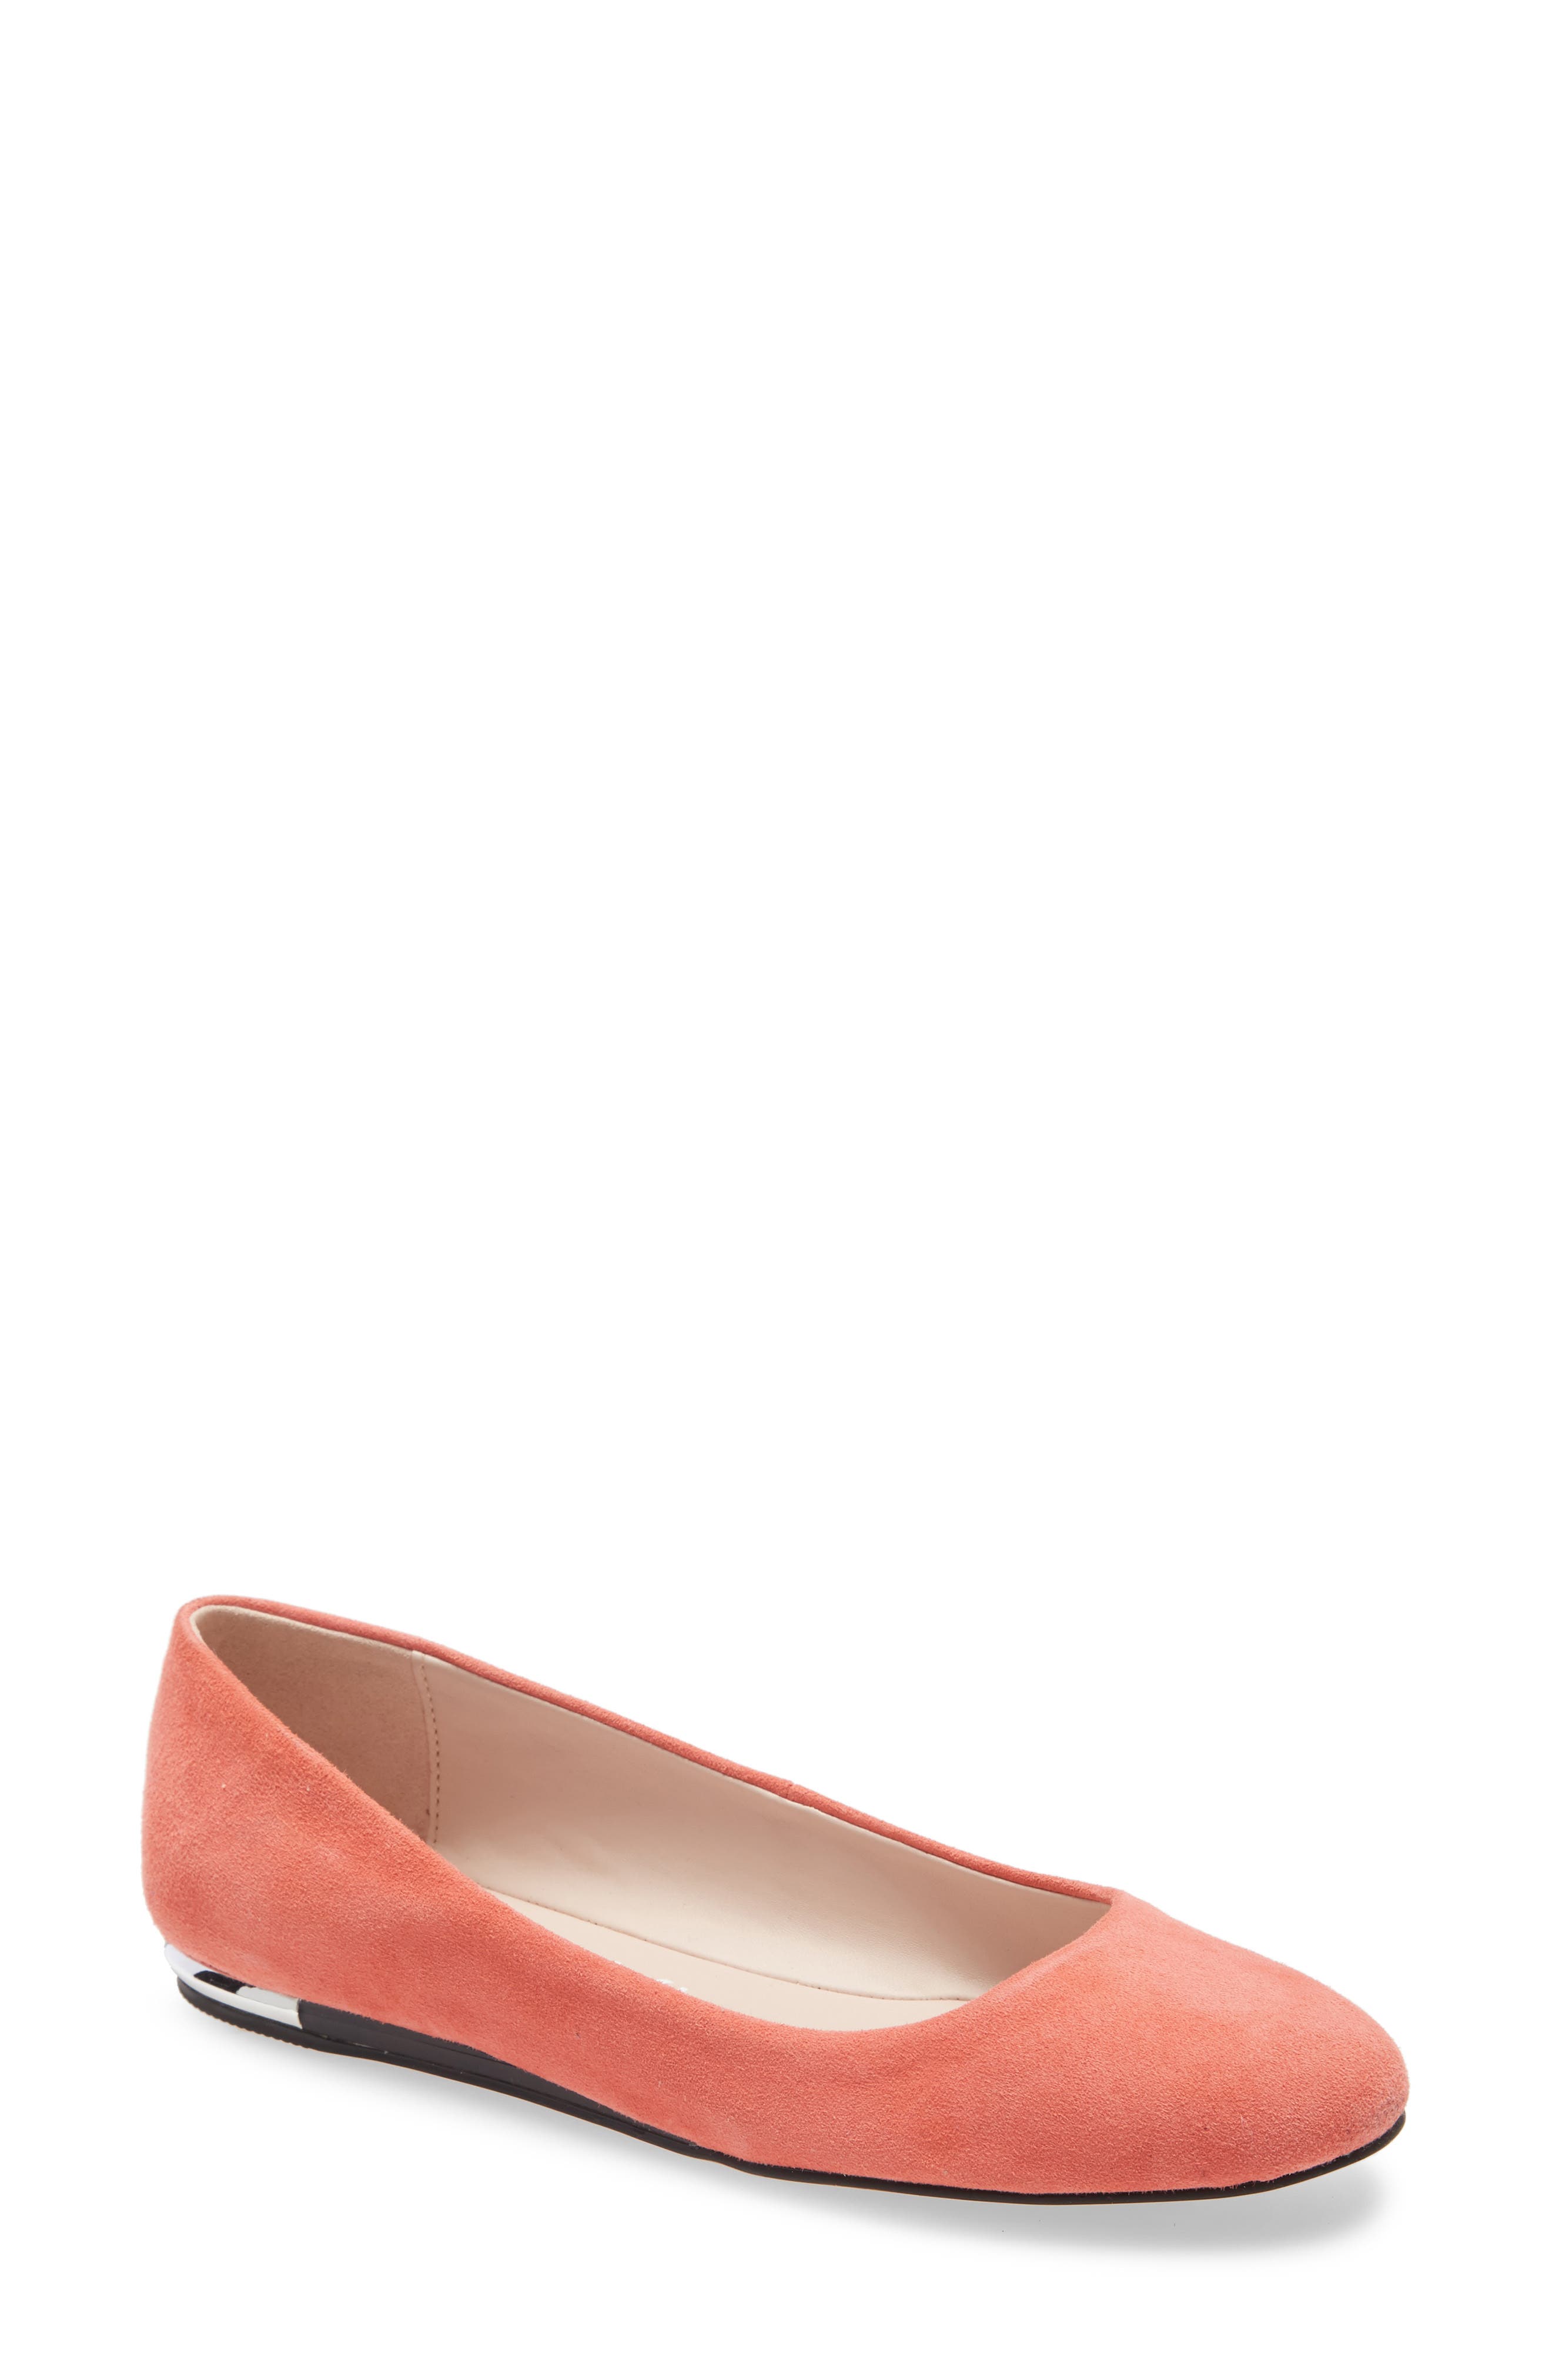 UPC 194060533278 product image for Women's Calvin Klein Kosi Skimmer Flat, Size 7.5 M - Coral | upcitemdb.com